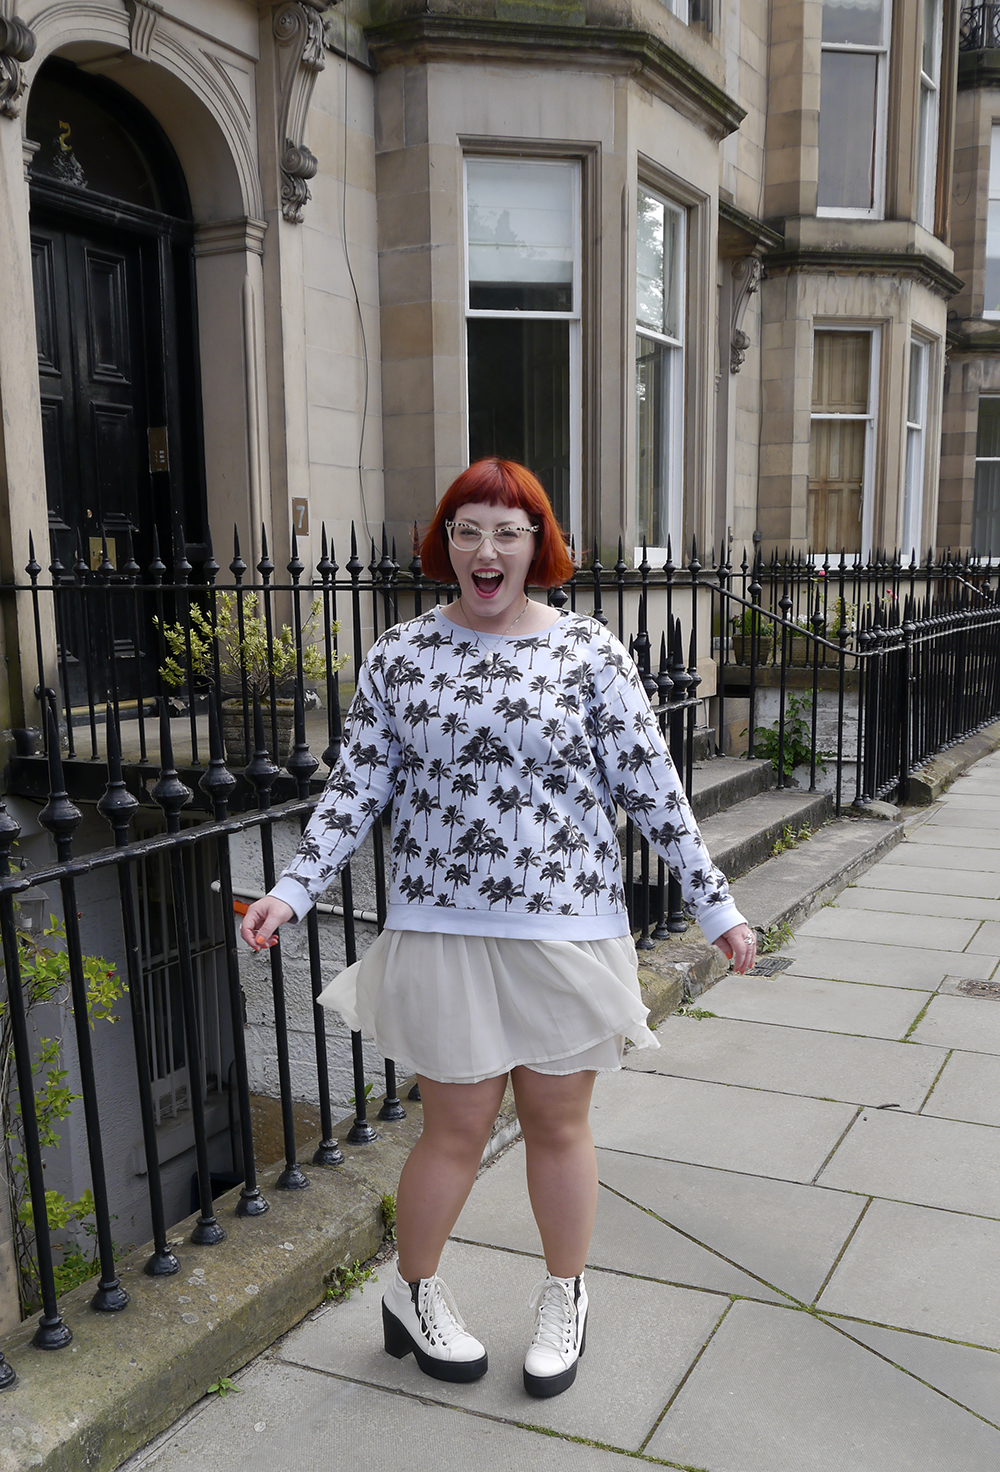 Scottish blogger, Edinburgh blogger, Scottish street style, quirky street style, dressing to a theme, food inspired outfit, pale girl style, Spex Pistols glasses, red head, red hair, H&M, patterned jumper, palm tree sweatshirt, white pleated dress, white boots, lace up shoes, milk necklace, Tiny Treat Boutique necklace, milk bottle jewellery, Lucky Dip Club